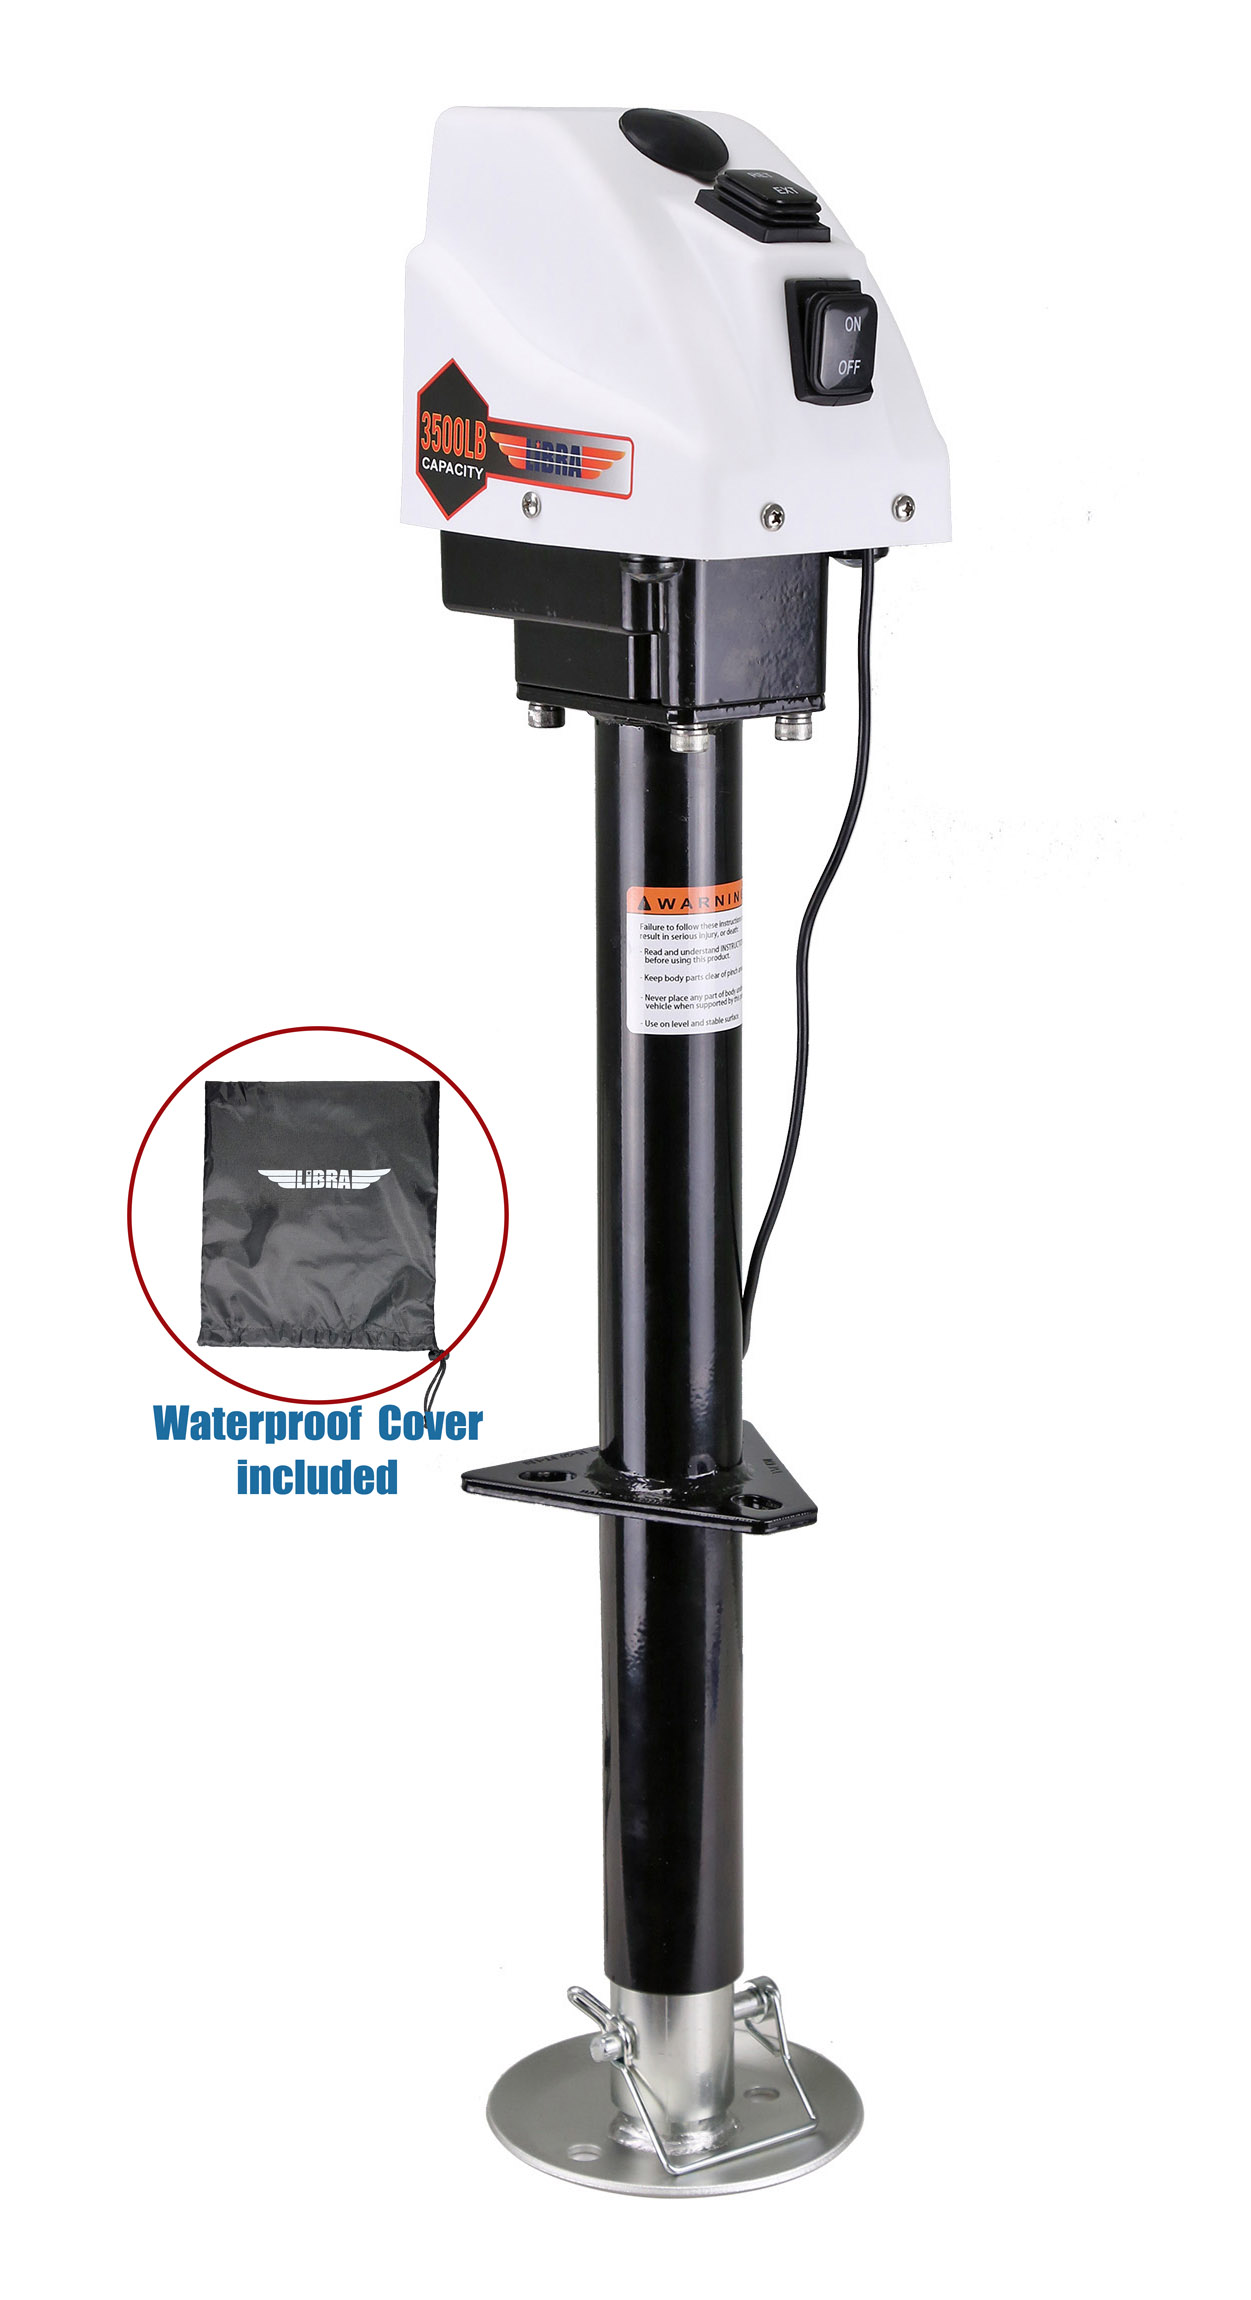 3500lbs Trailer/RV Electric Power Tongue Jack 26042 - image 1 of 9